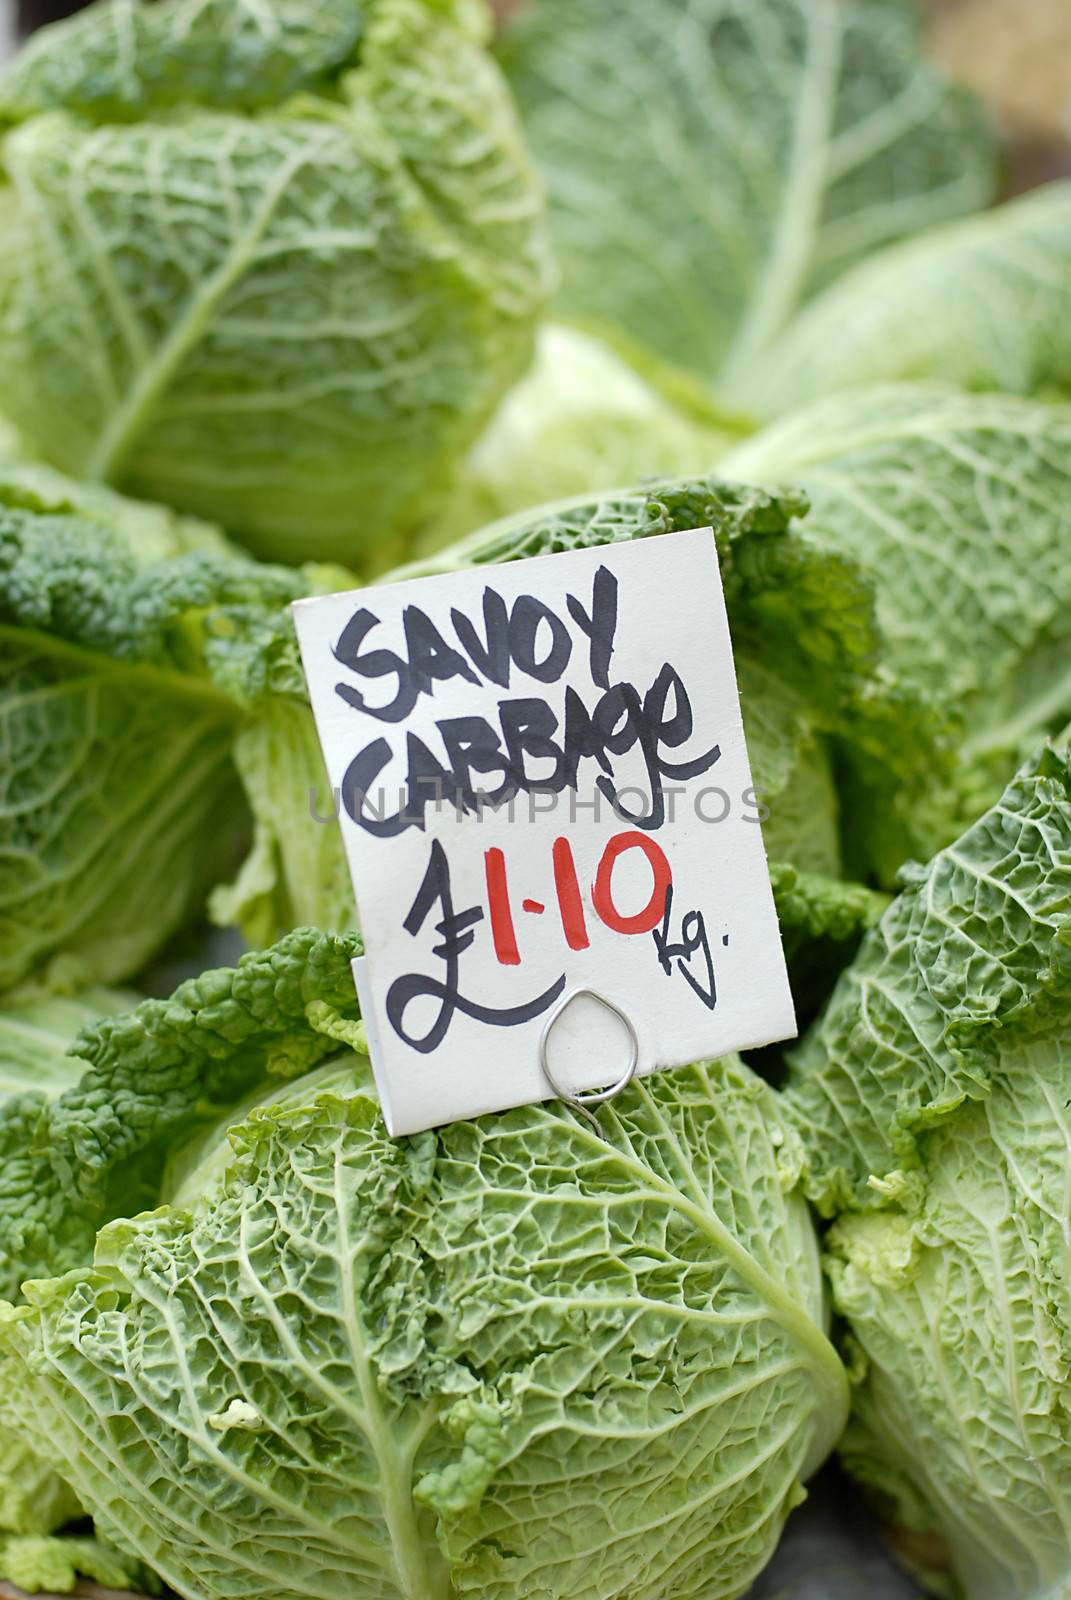 Savoy cabbage vegetable for sale priced at 1.10 euro per kg